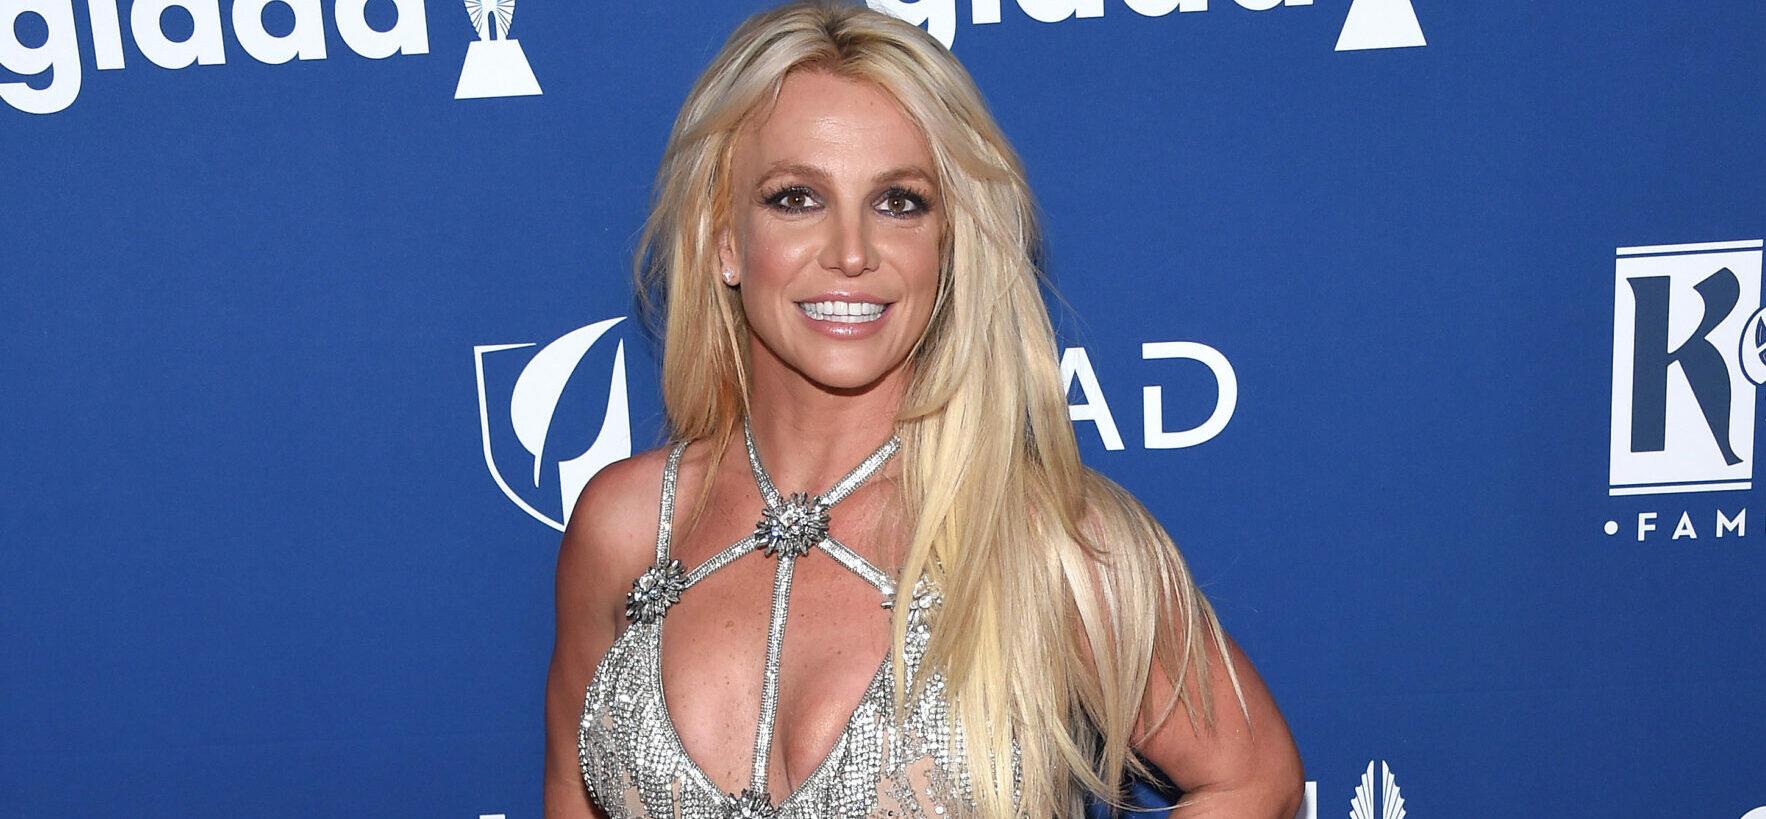 Did Britney Spears Just Reveal Her Baby’s Name And Gender?!